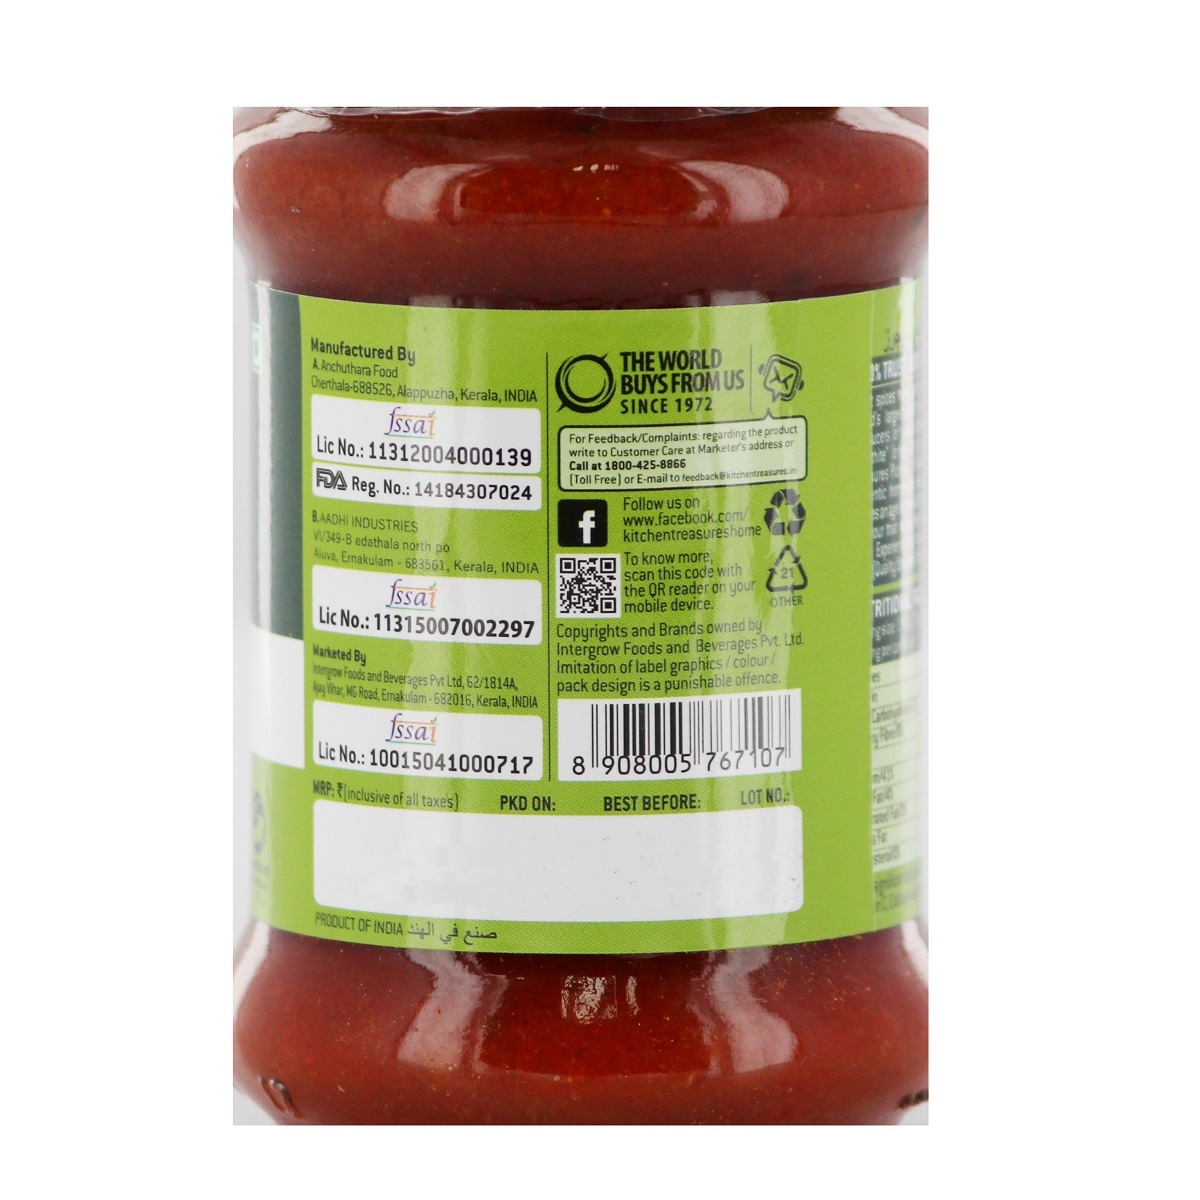 Kitchen Treasures Lime Pickle 150g